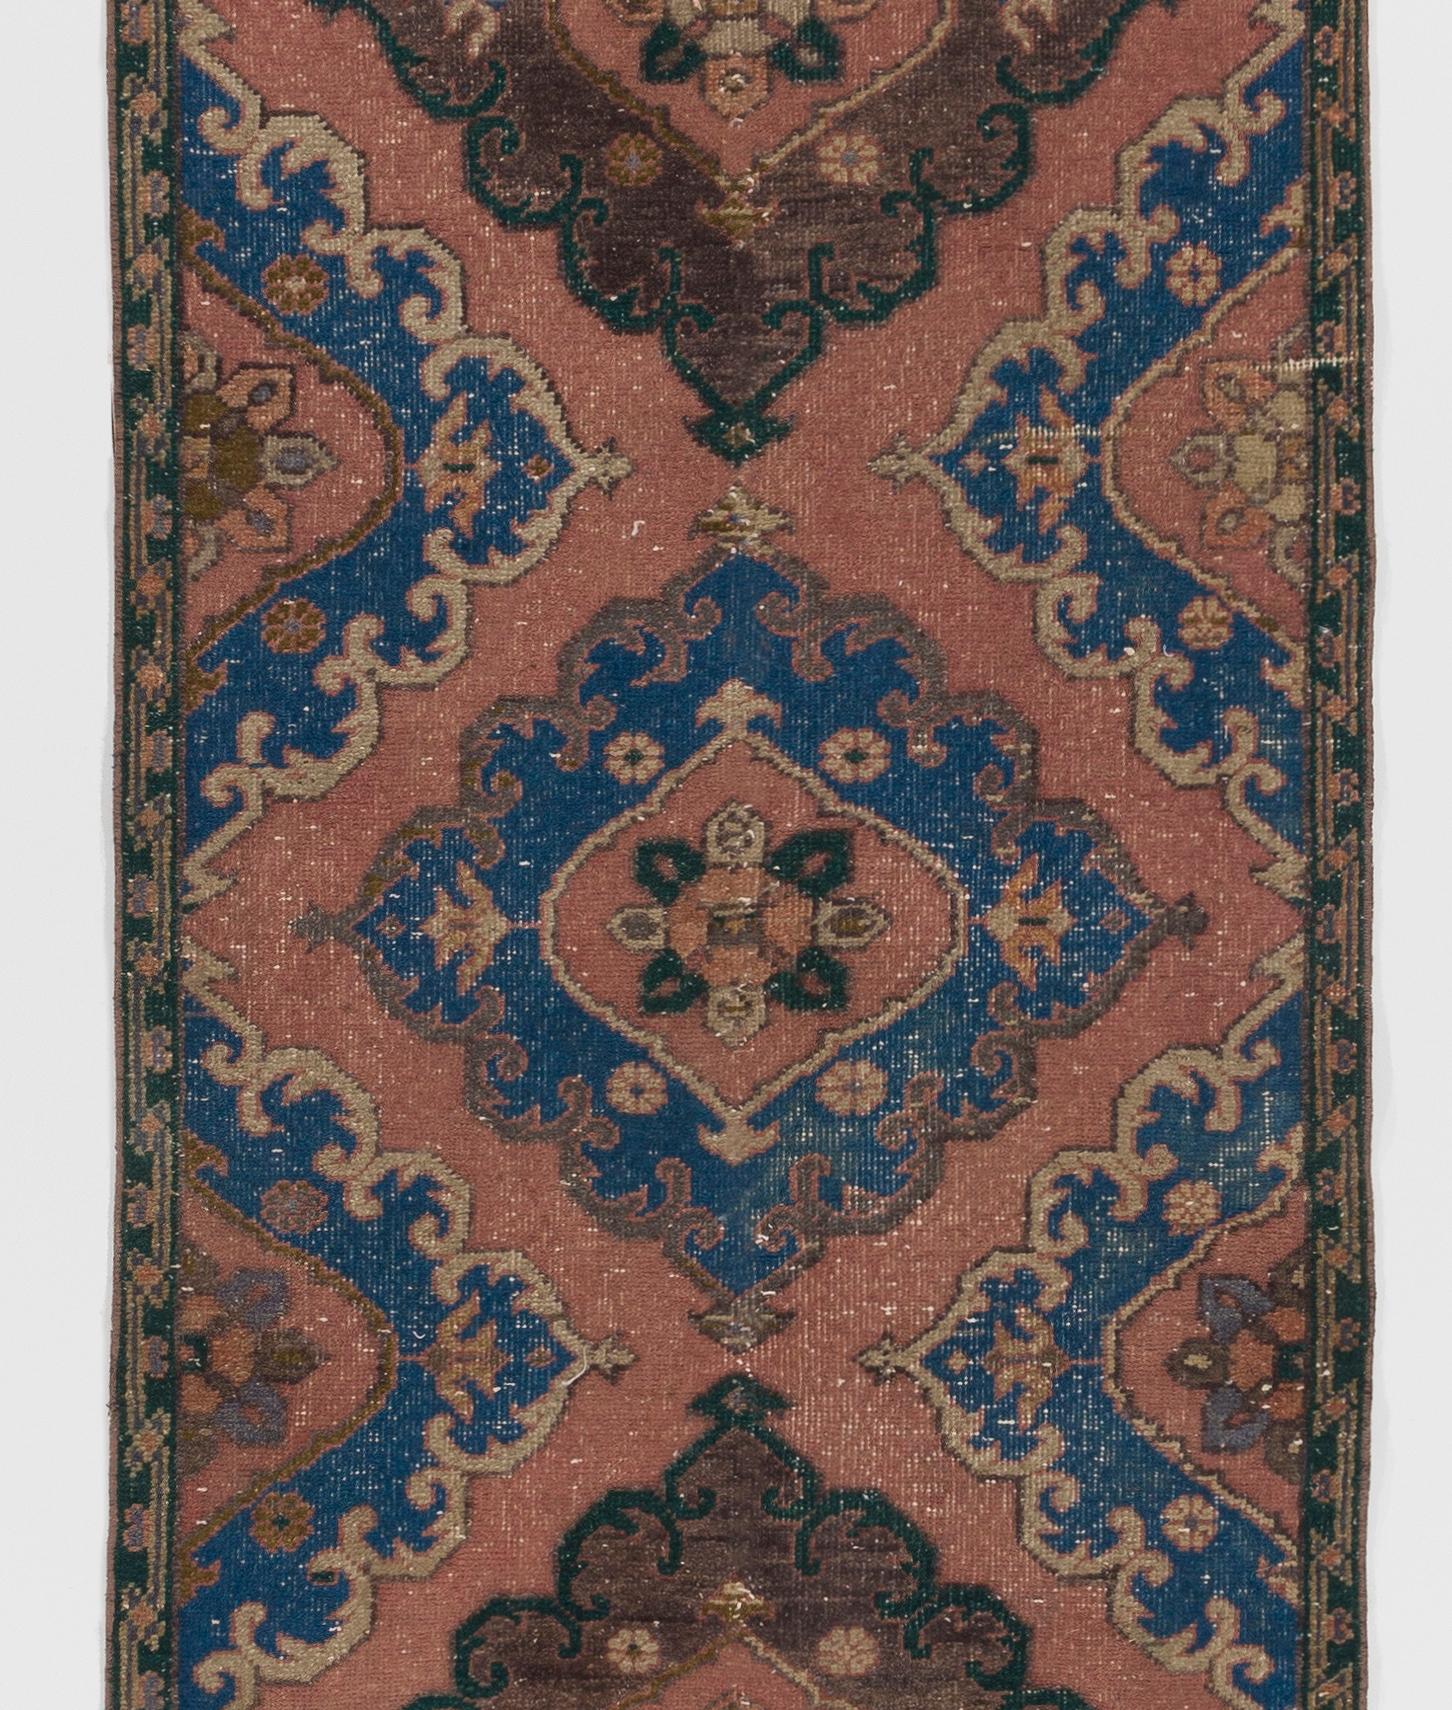 A mid-20th century hand knotted runner rug from Central Anatolia. 

As a true vintage piece, this runner rug has aged gracefully, acquiring a patina that enhances its character and authenticity. The all-wool composition contributes to a luxurious